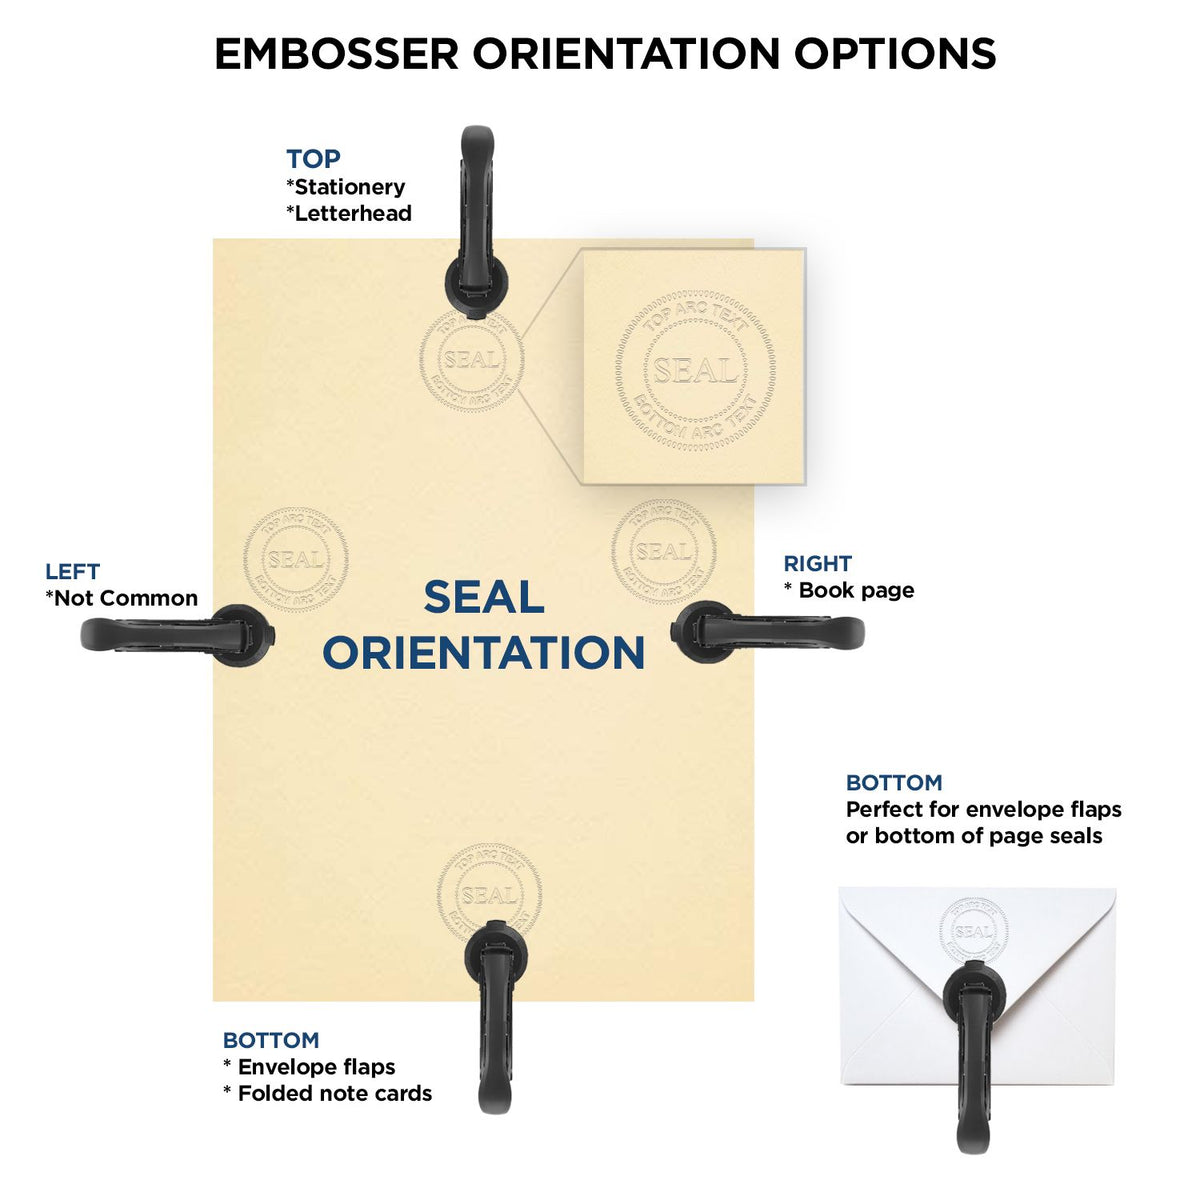 An infographic for the Heavy Duty Cast Iron Tennessee Geologist Seal Embosser showing embosser orientation, this is showing examples of a top, bottom, right and left insert.